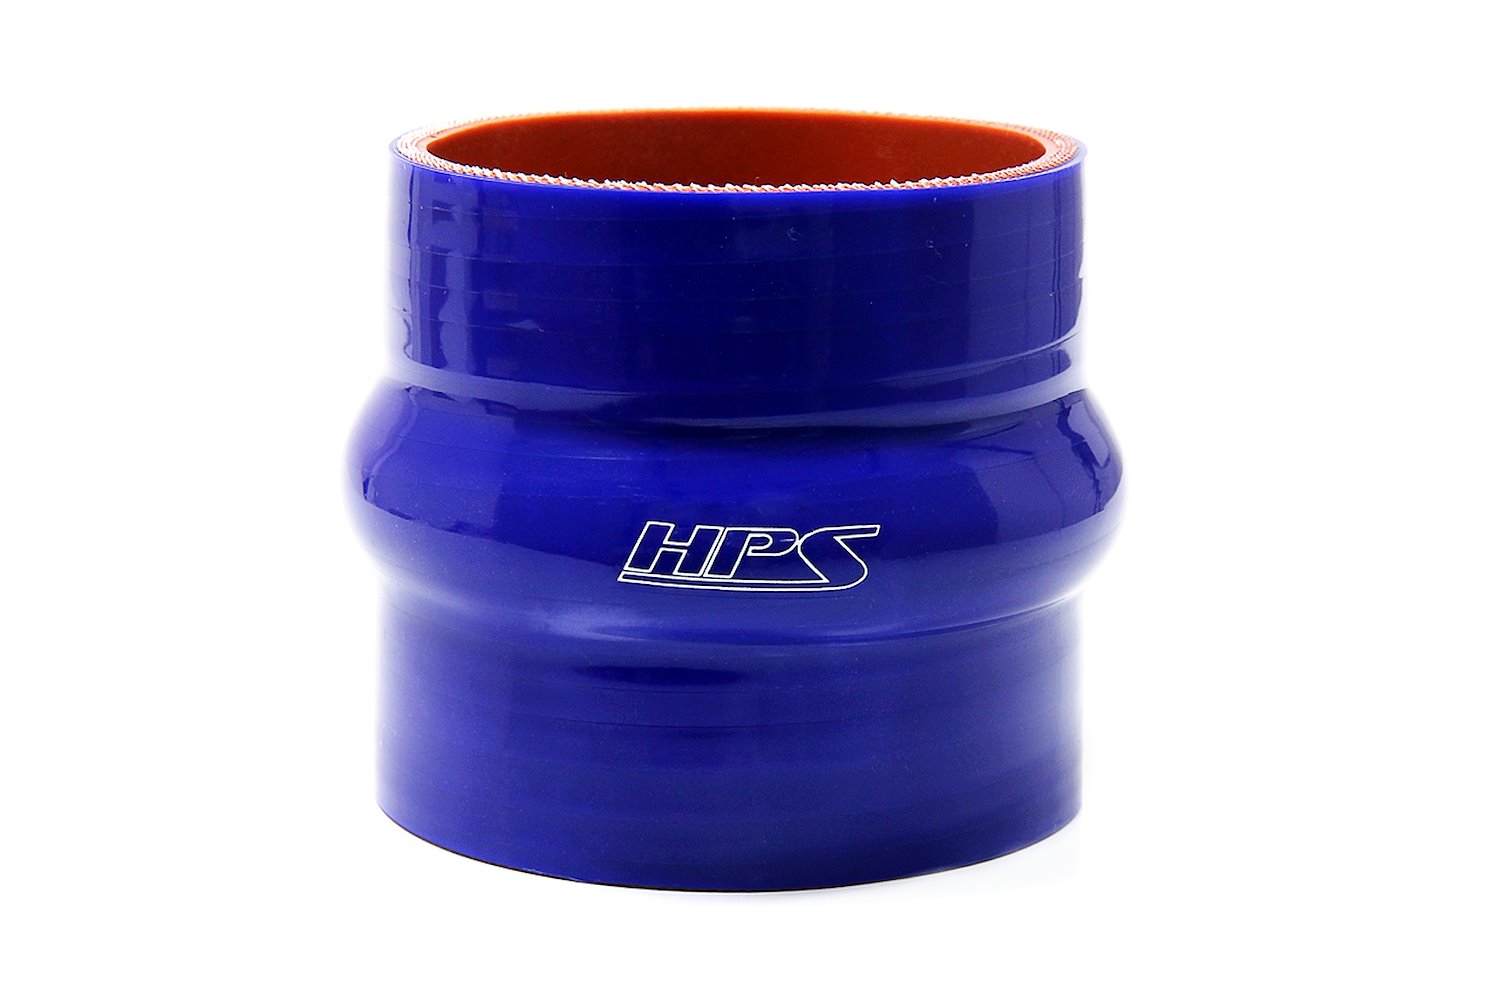 HTSHC-138-BLUE Silicone Hump Coupler Hose, High-Temp 4-Ply Reinforced, 1-3/8 in. ID, 3 in. Long, Blue